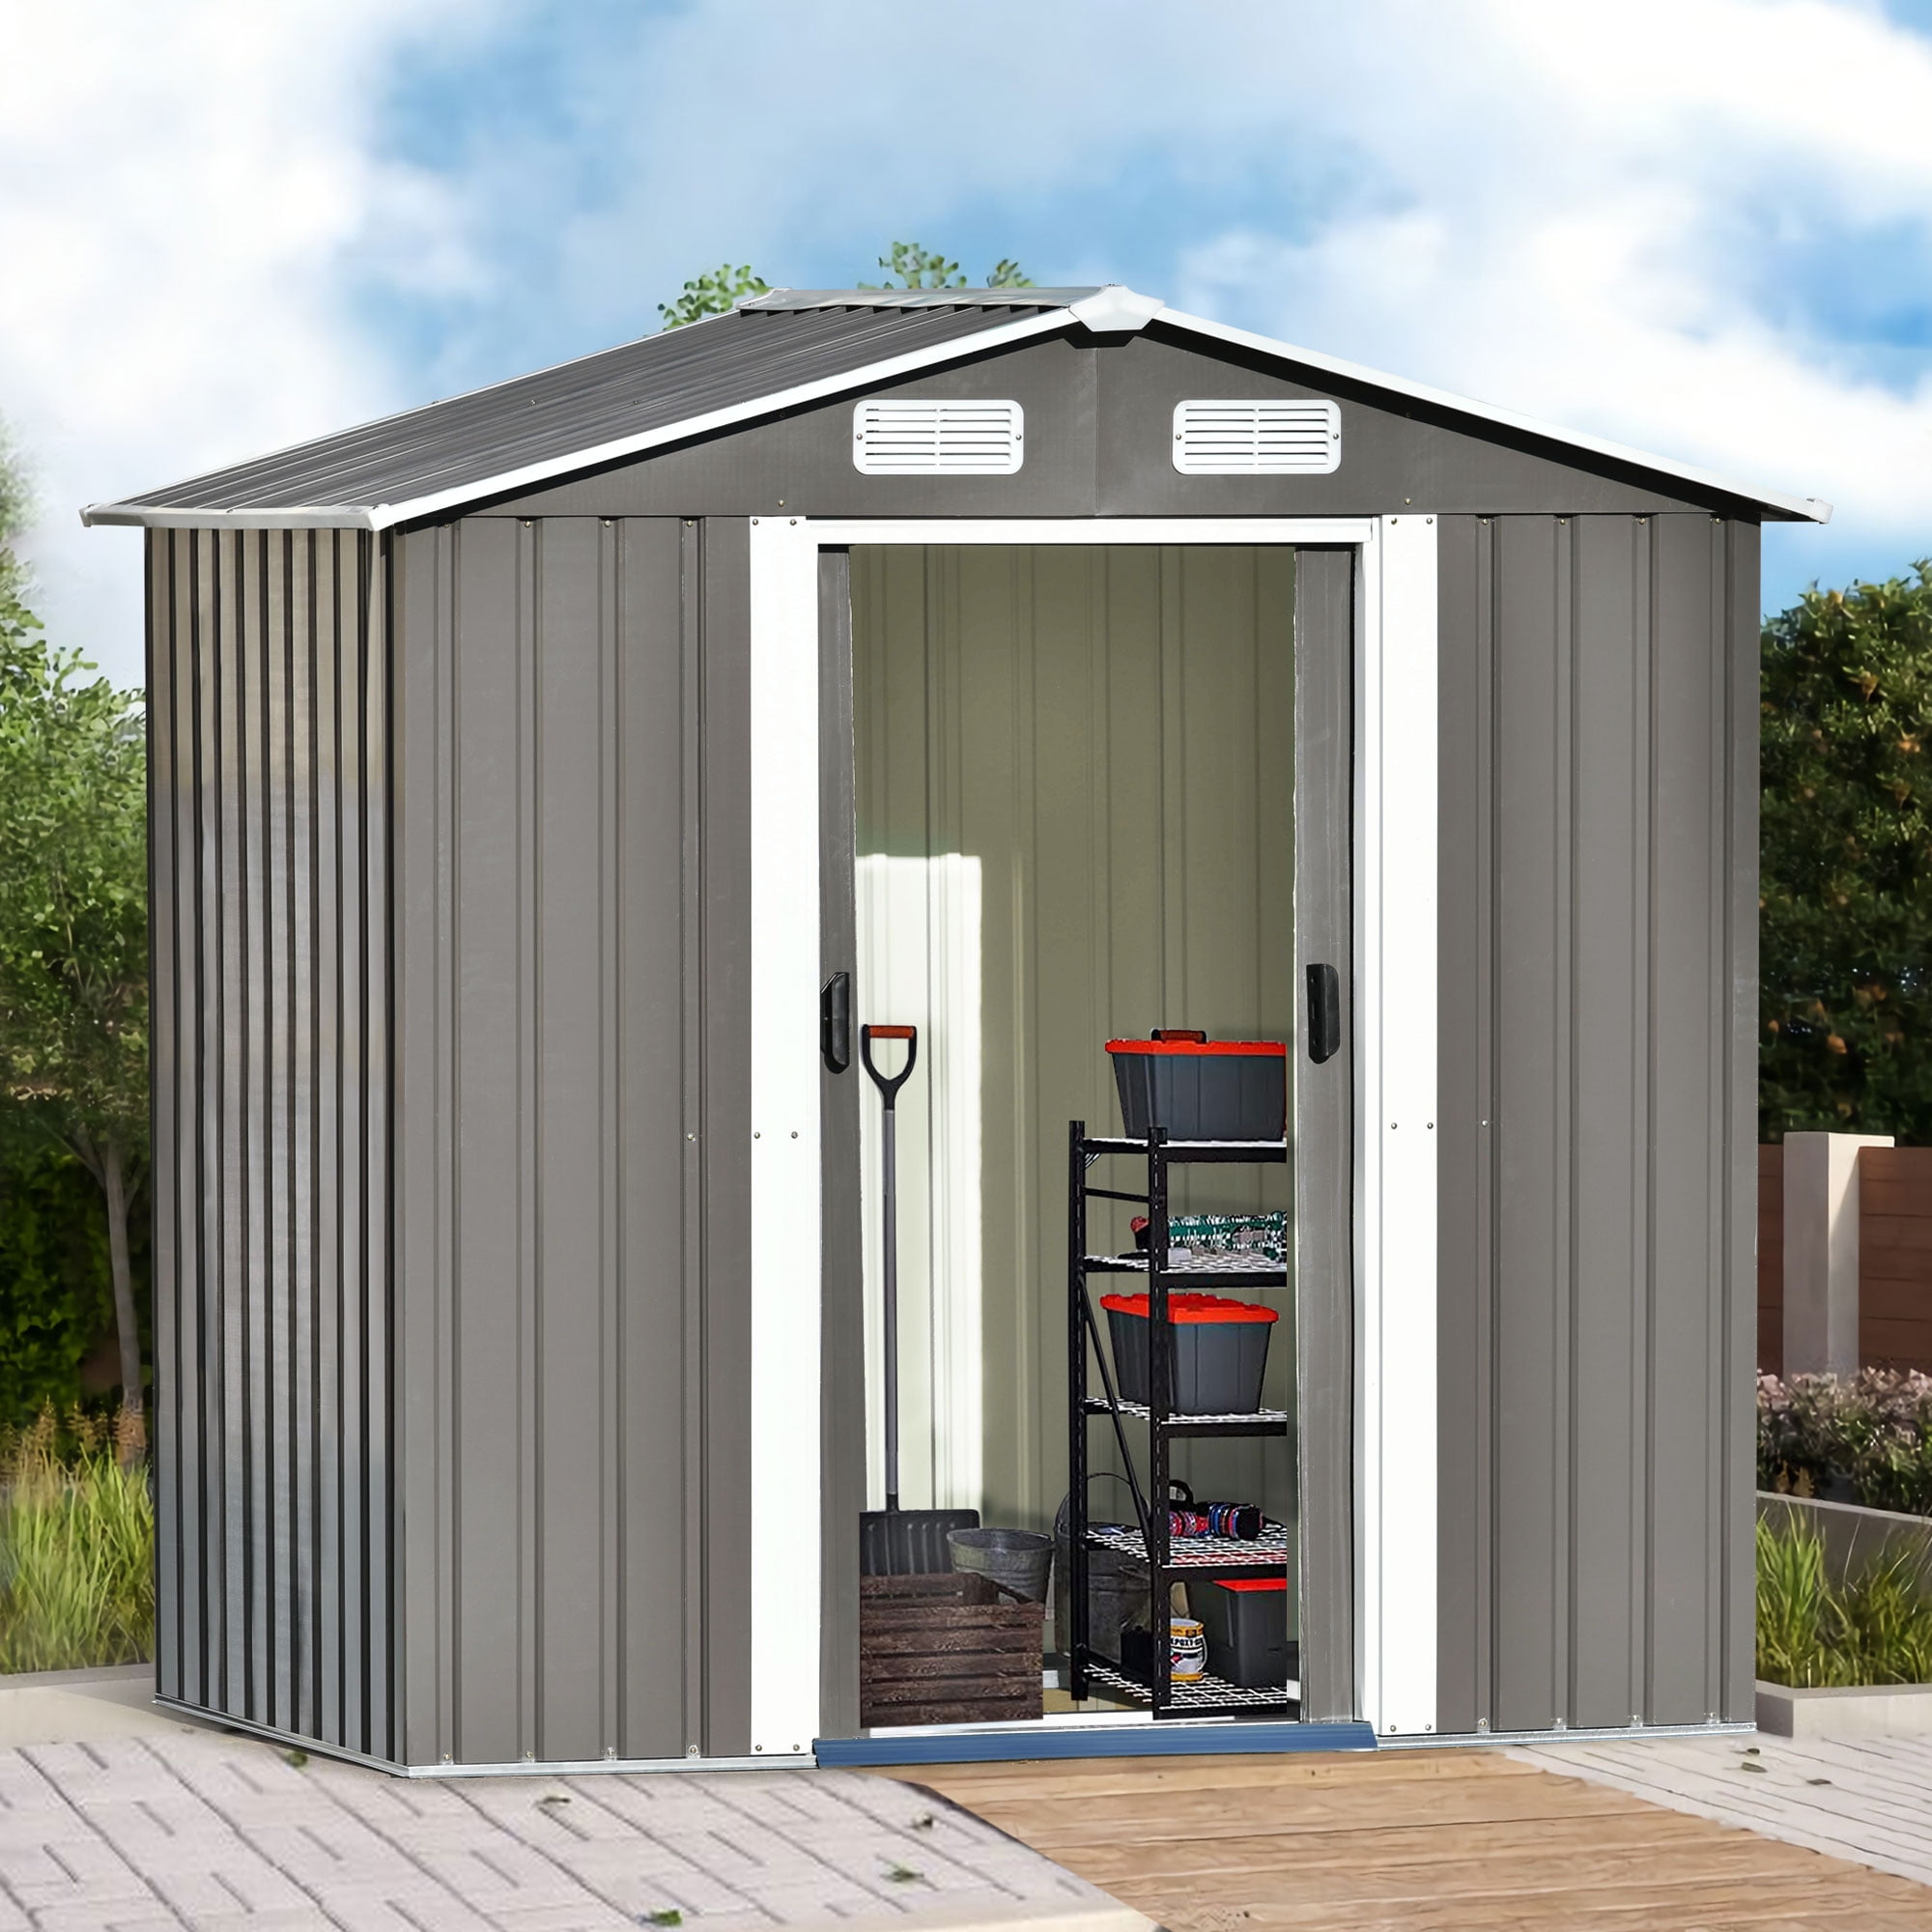 8ft x 4ft METAL GARDEN STORAGE PENT ROOF SHED DOUBLE DOORS PRE PAINTED STORE NEW 